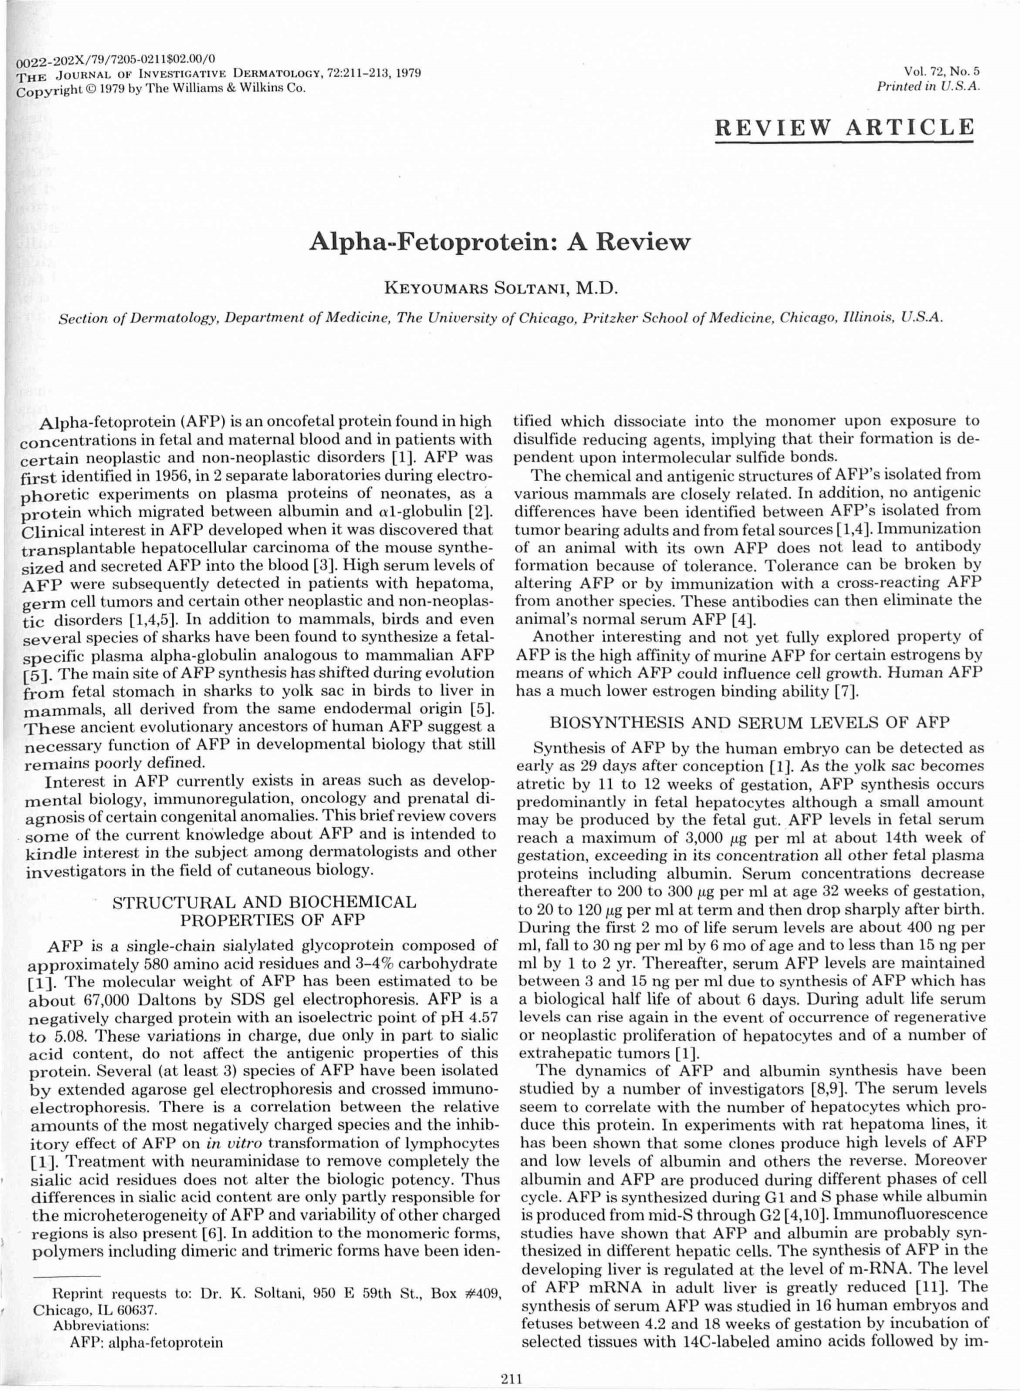 Alpha-Fetoprotein: a Review